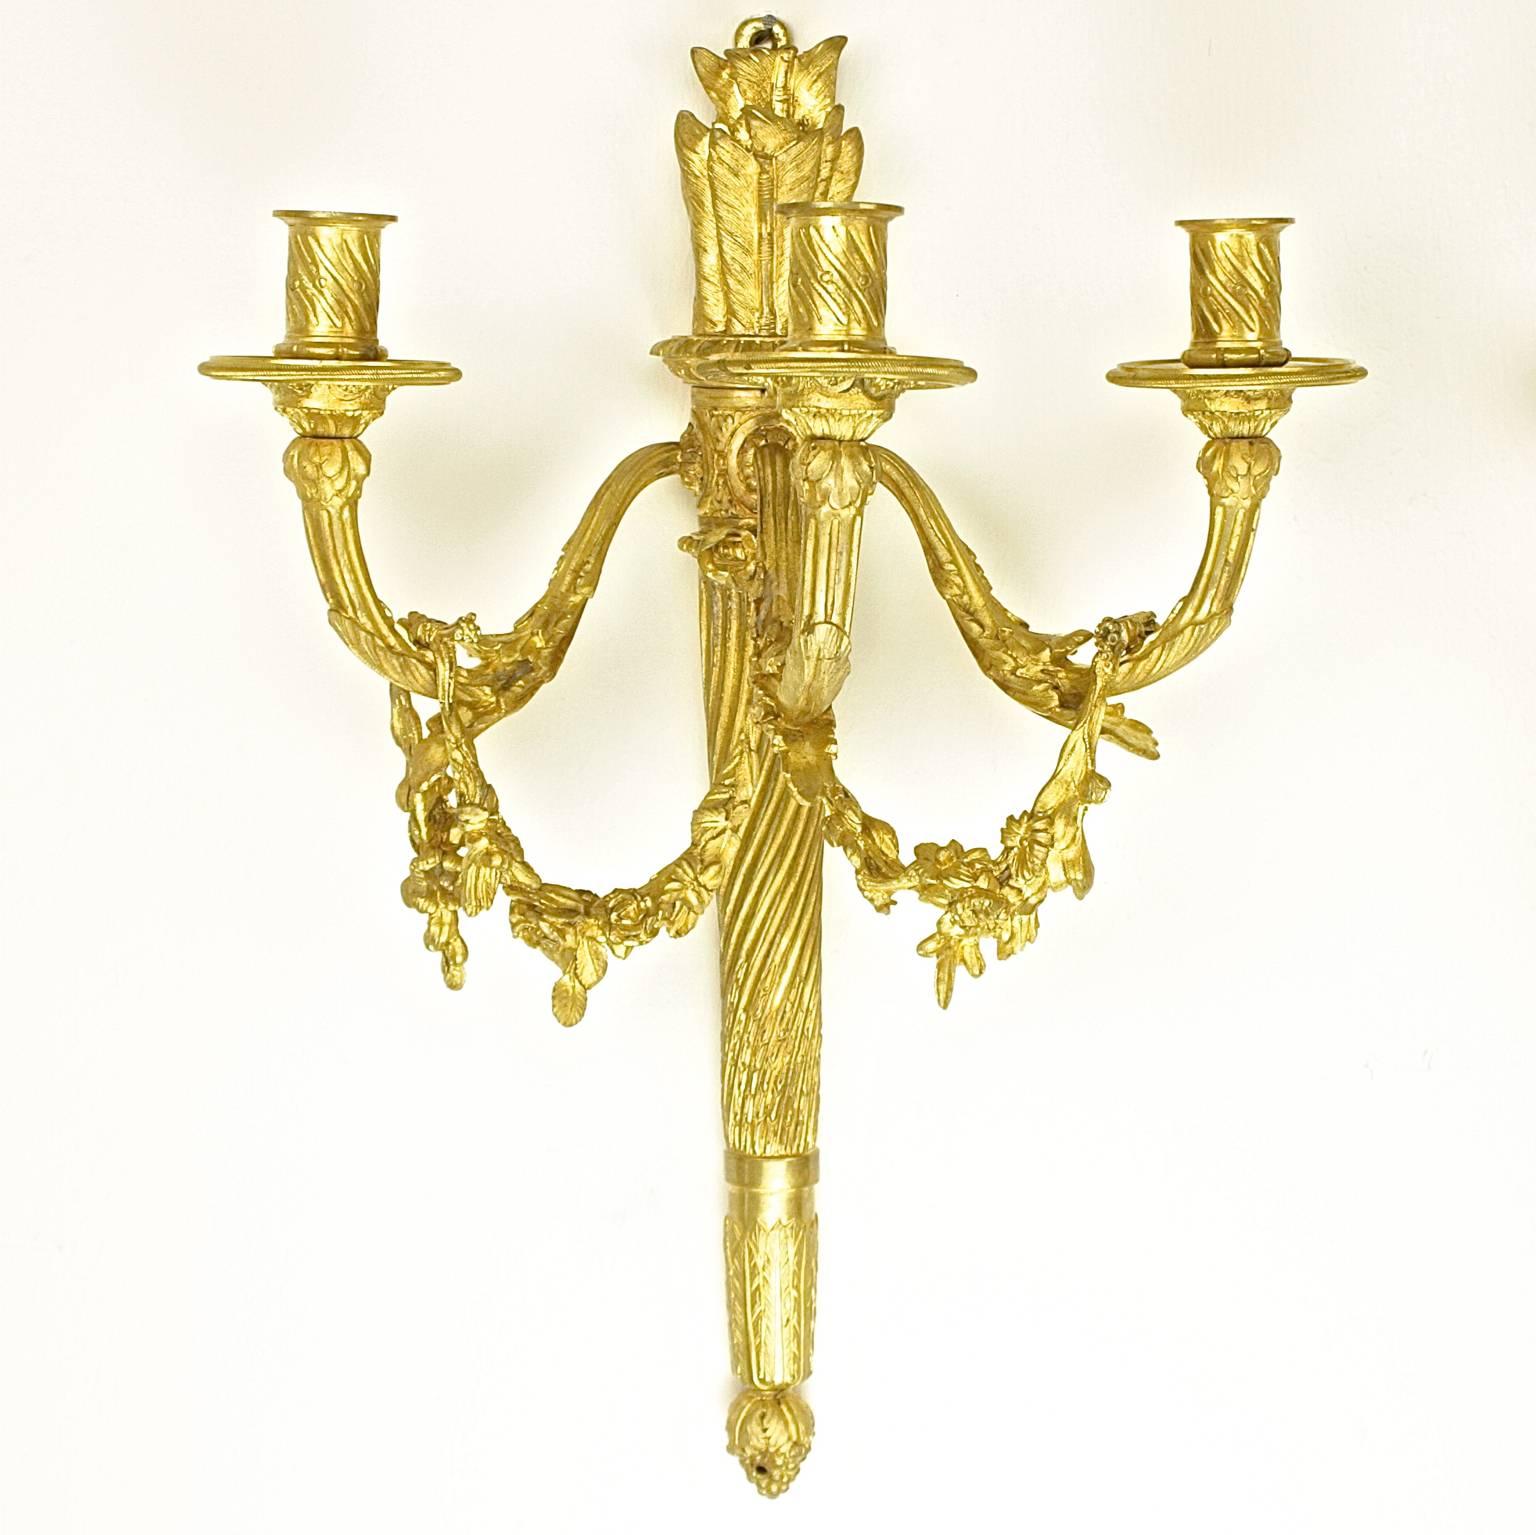 Pair of Louis XVI Style Three-Light Gilt-Bronze Sconce, attributed to H. Vian

A pair of Louis XVI style three-light and quiver-shaped wall-lights, each issuing three arms from a finely chased backplate displaying twisted channeling of beautiful